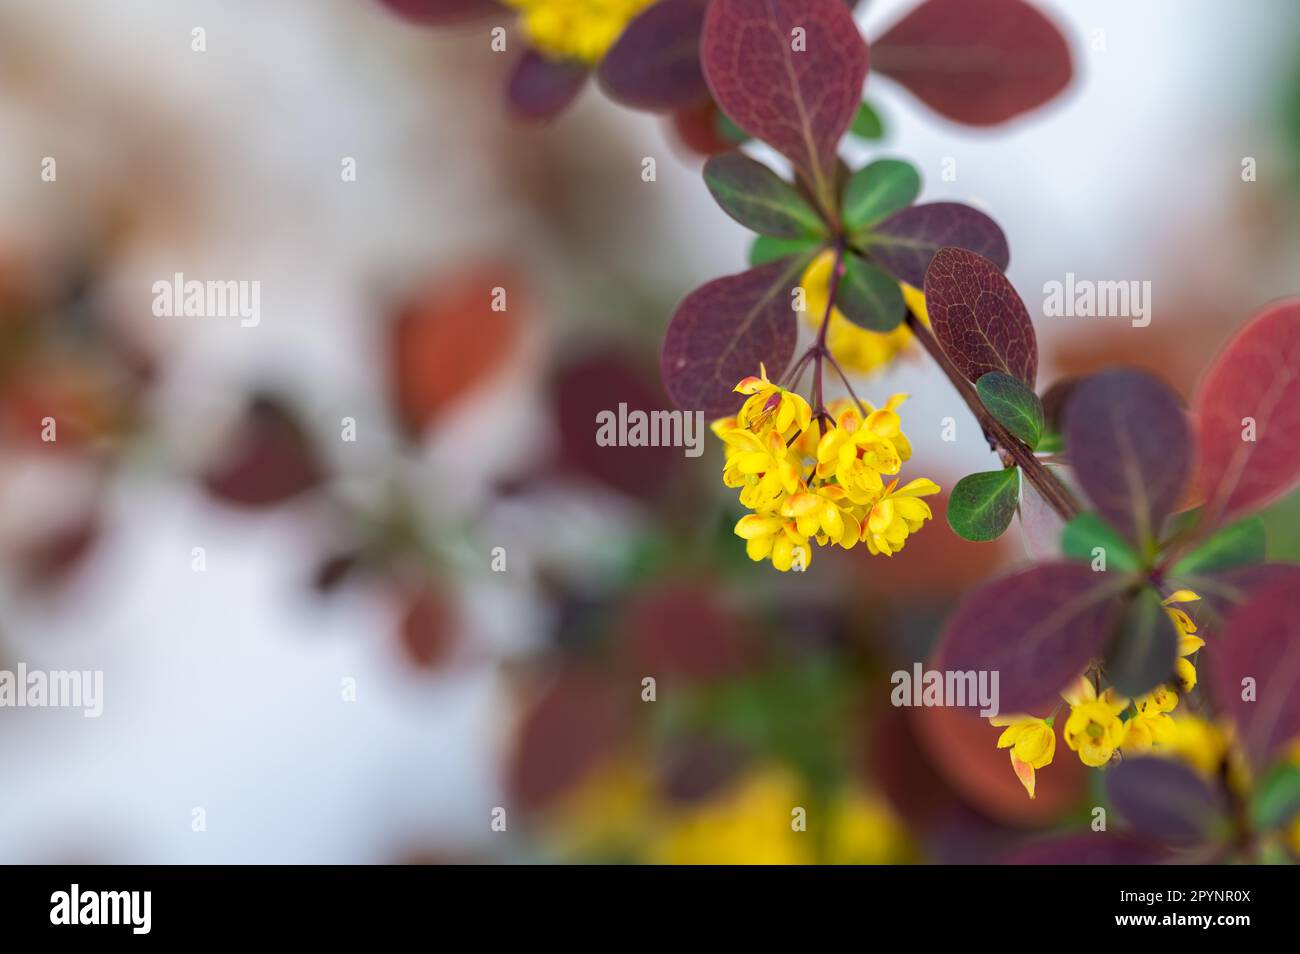 Detail of the small yellow flowers of a red barberry (Berberis thunbergii) in the garden Stock Photo